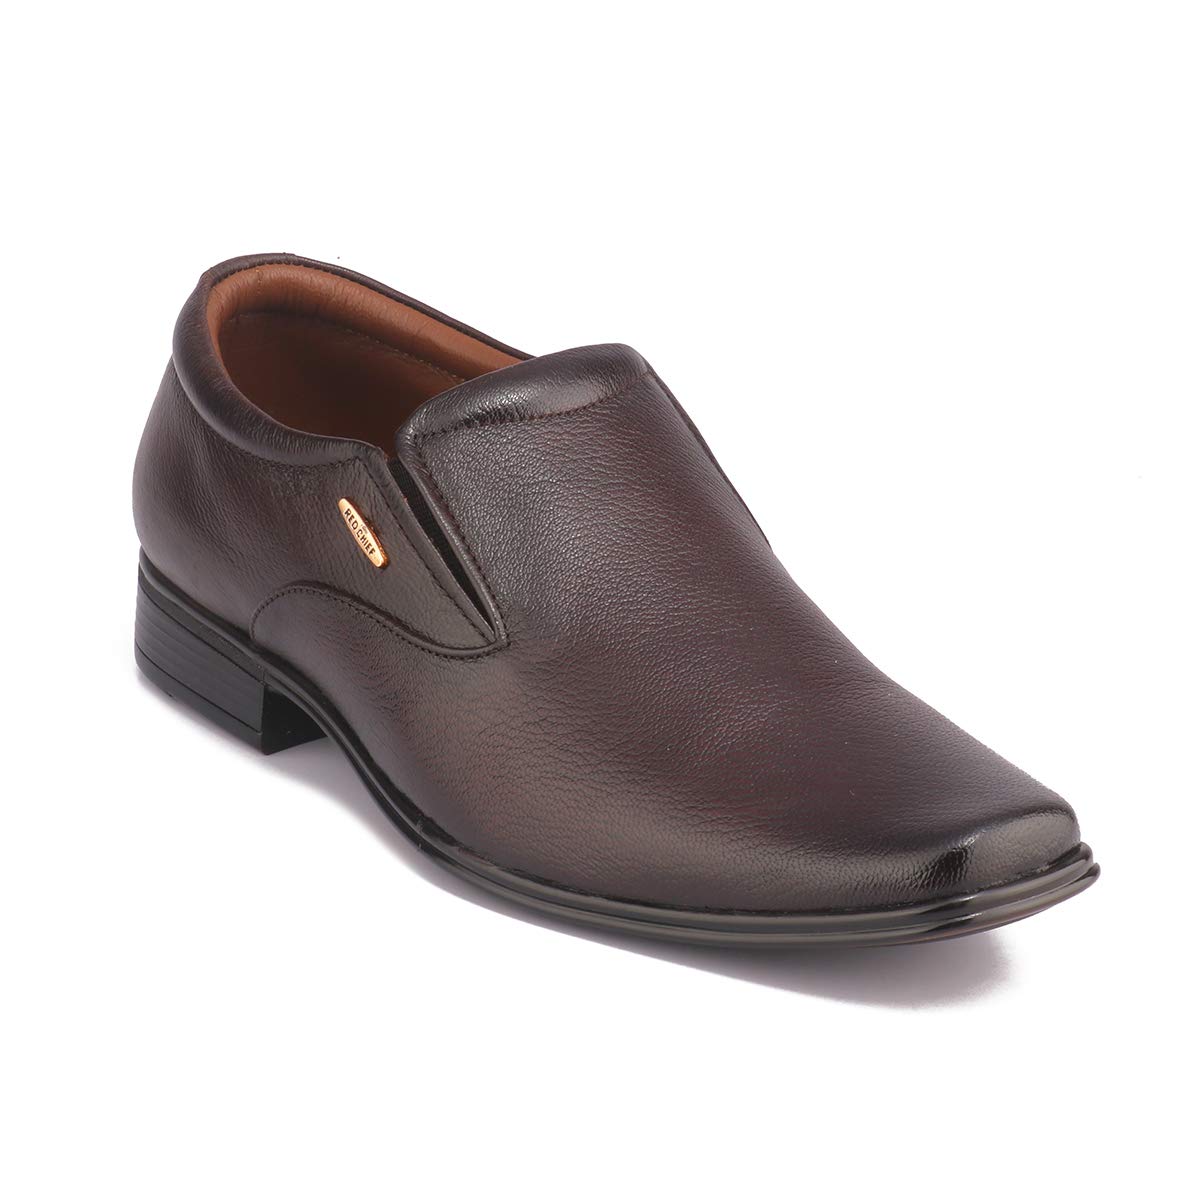 Red Chief Dark Brown Leather Formal Slip on Shoes for Men_Size 10_UK_RC1999 095